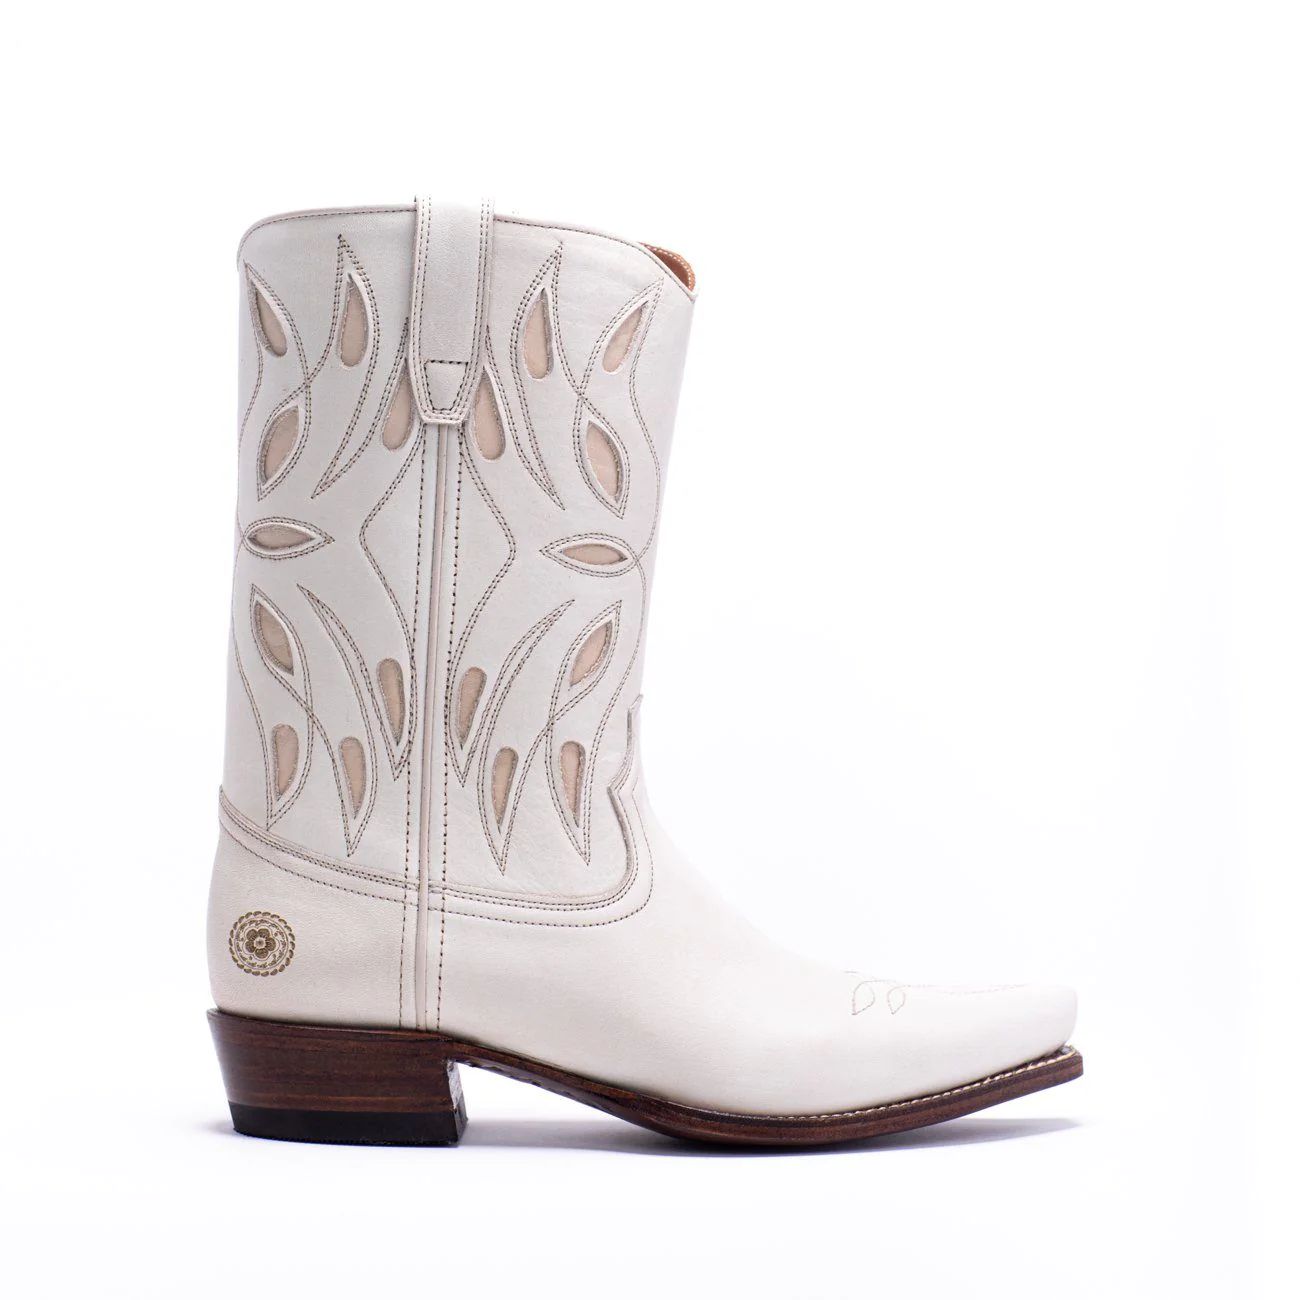 Womens Sagebrush White Leather Cowboy Boot - Ranch Road Boots™ | Ranch Road Boots